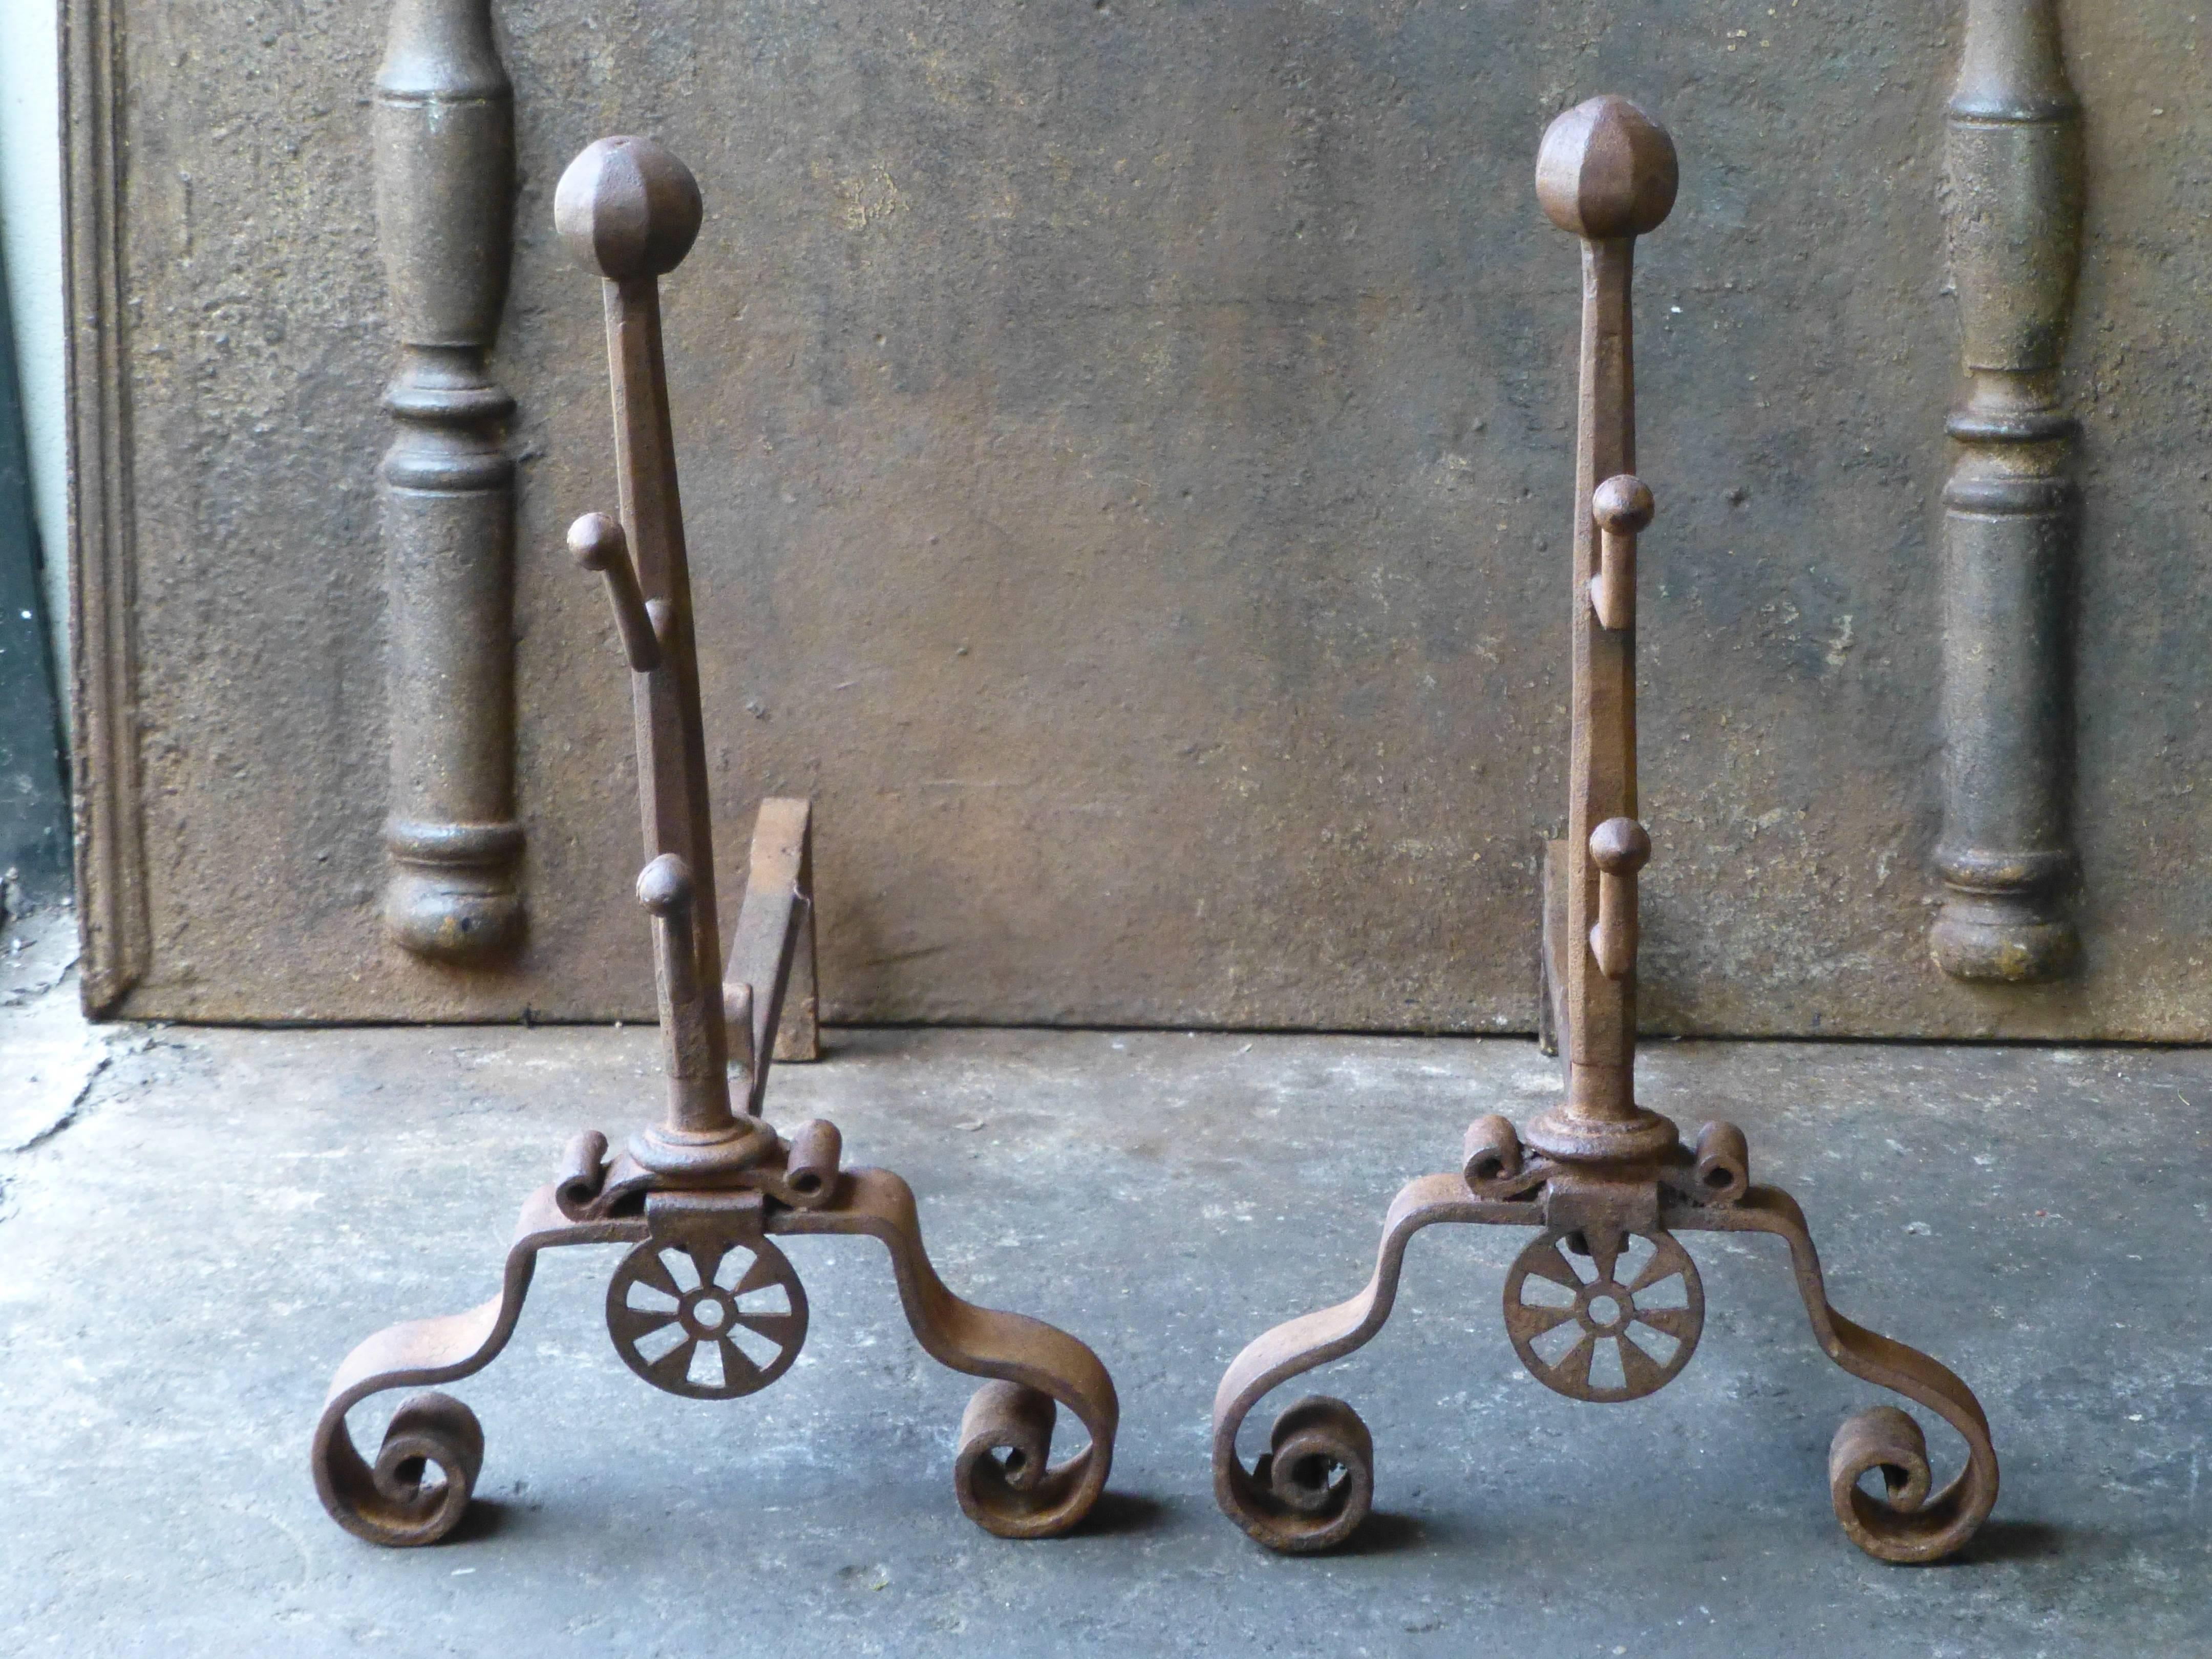 18th century French firedogs, andirons made of wrought iron. The condition is good.